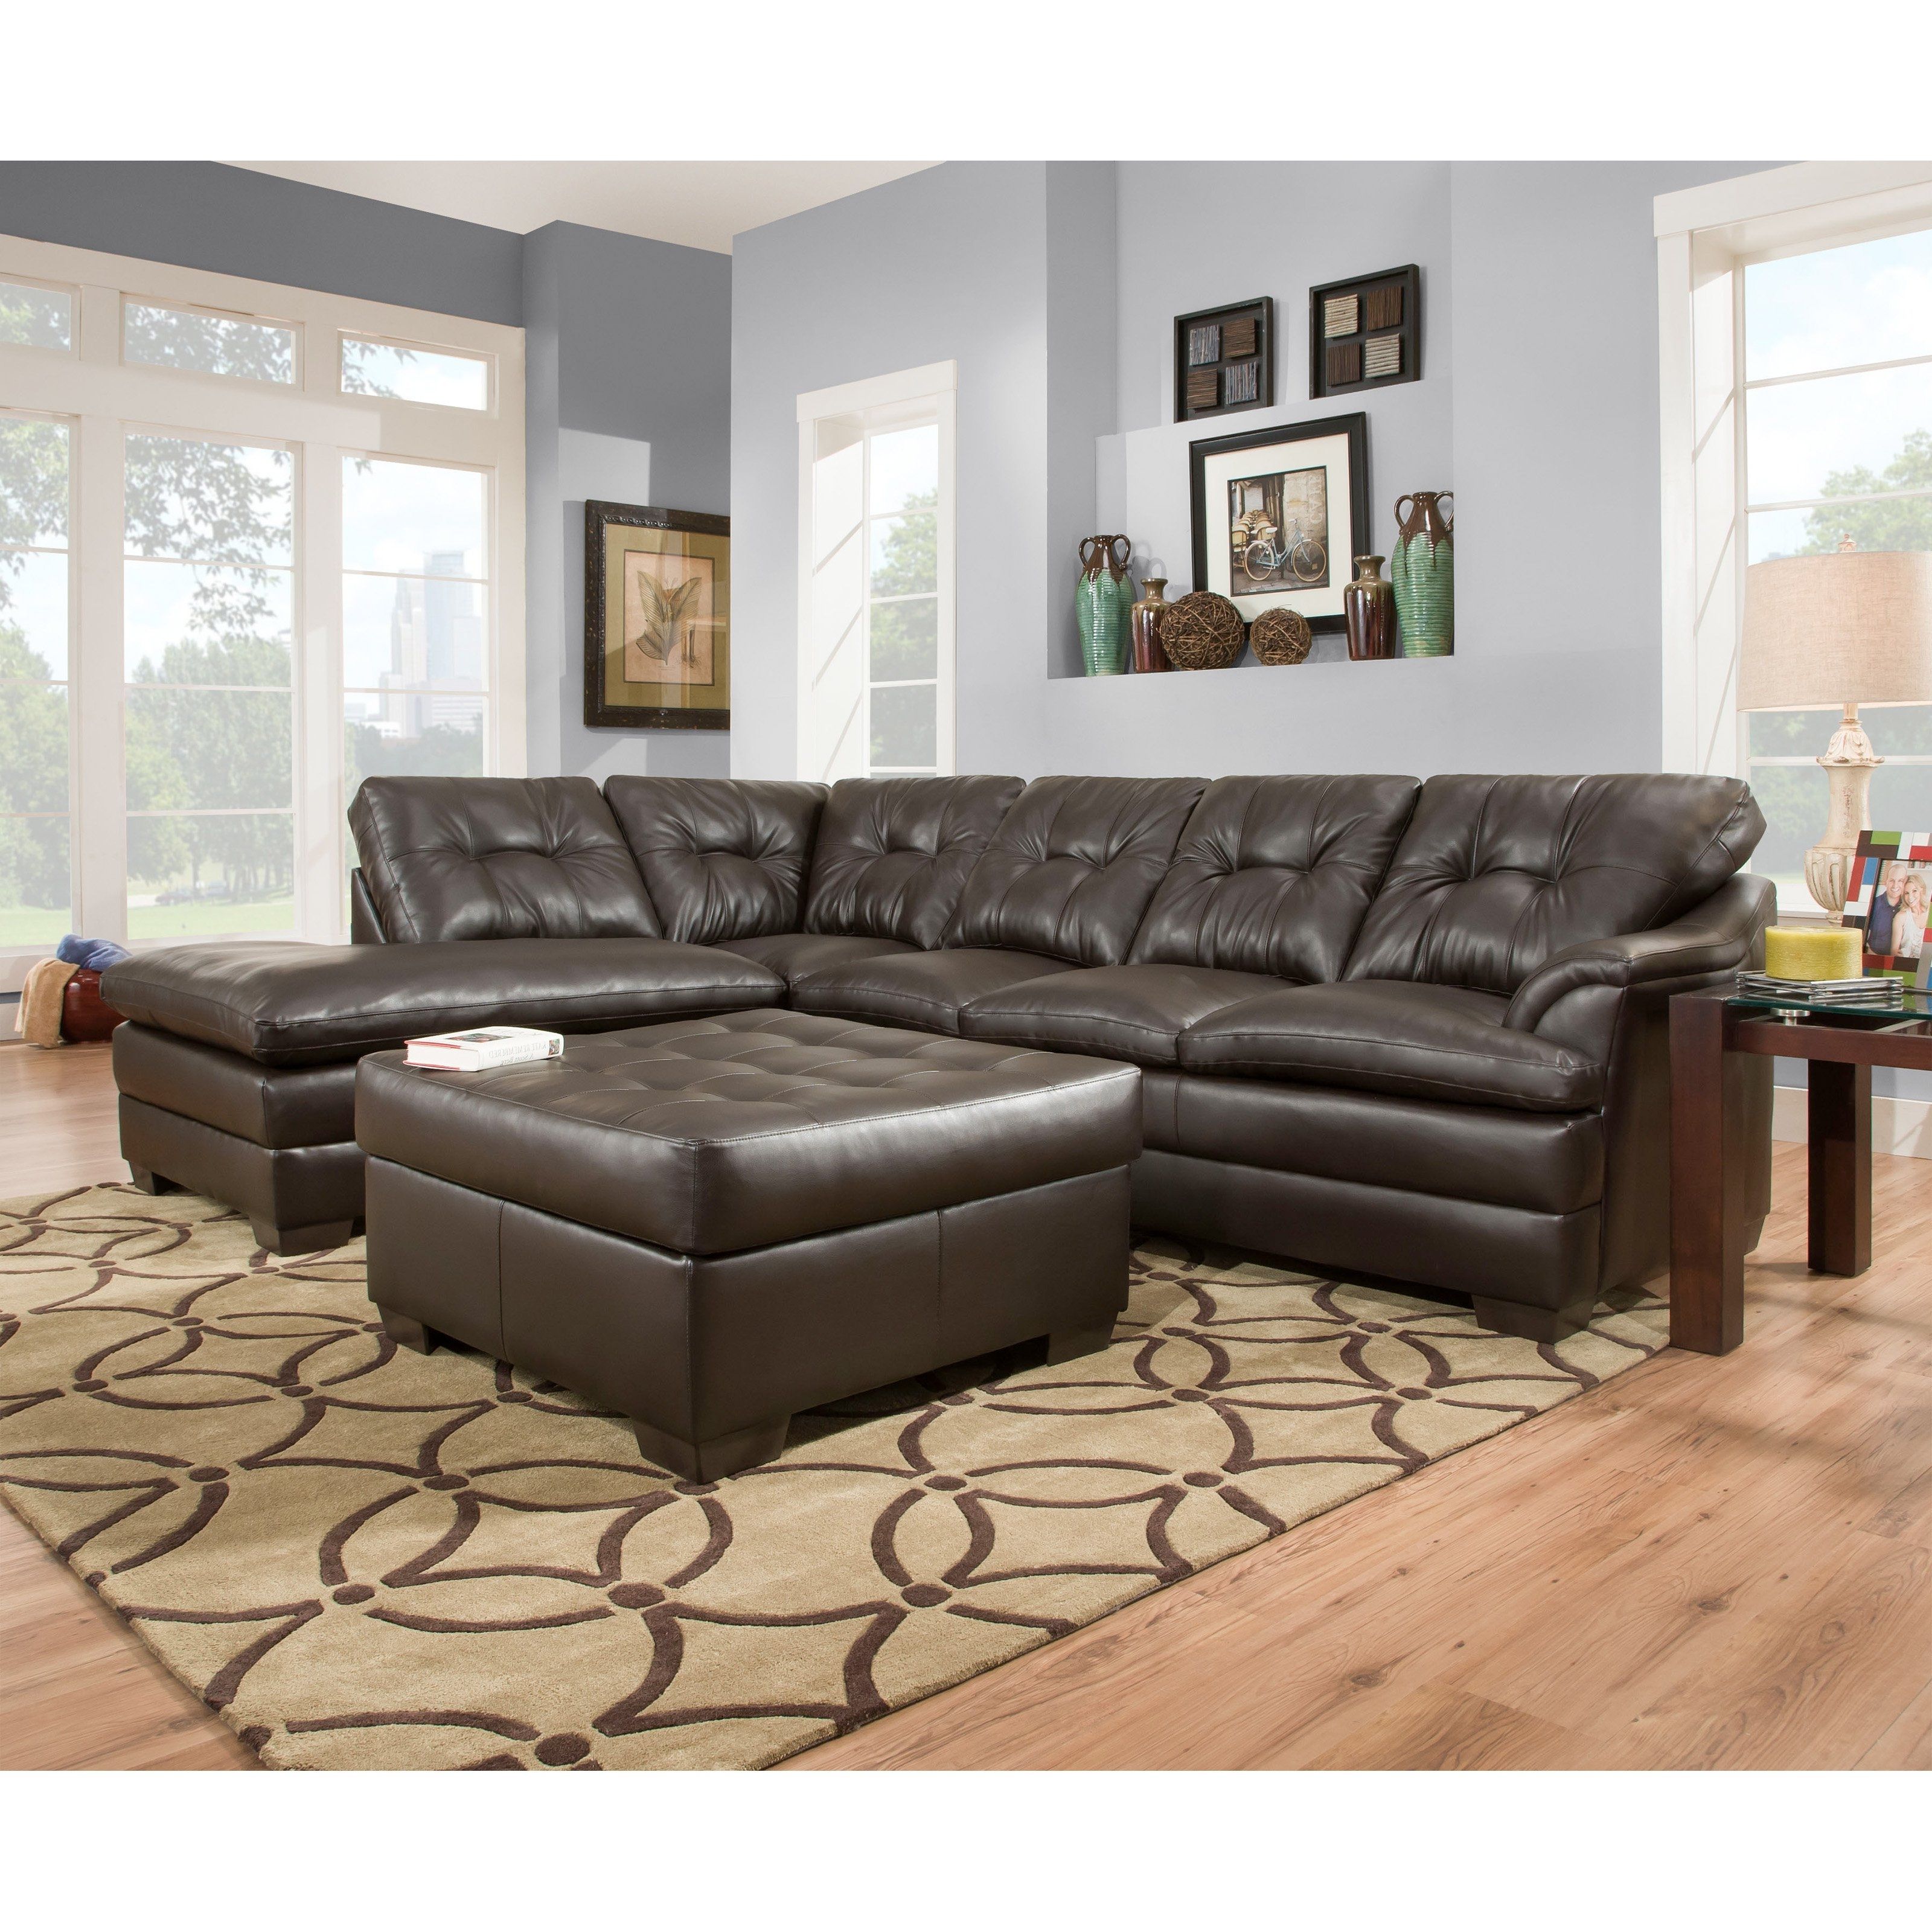 Nanaimo Sectional Sofas With Latest Simmons Upholstery Apollo Sectional With Optional Ottoman (View 5 of 20)